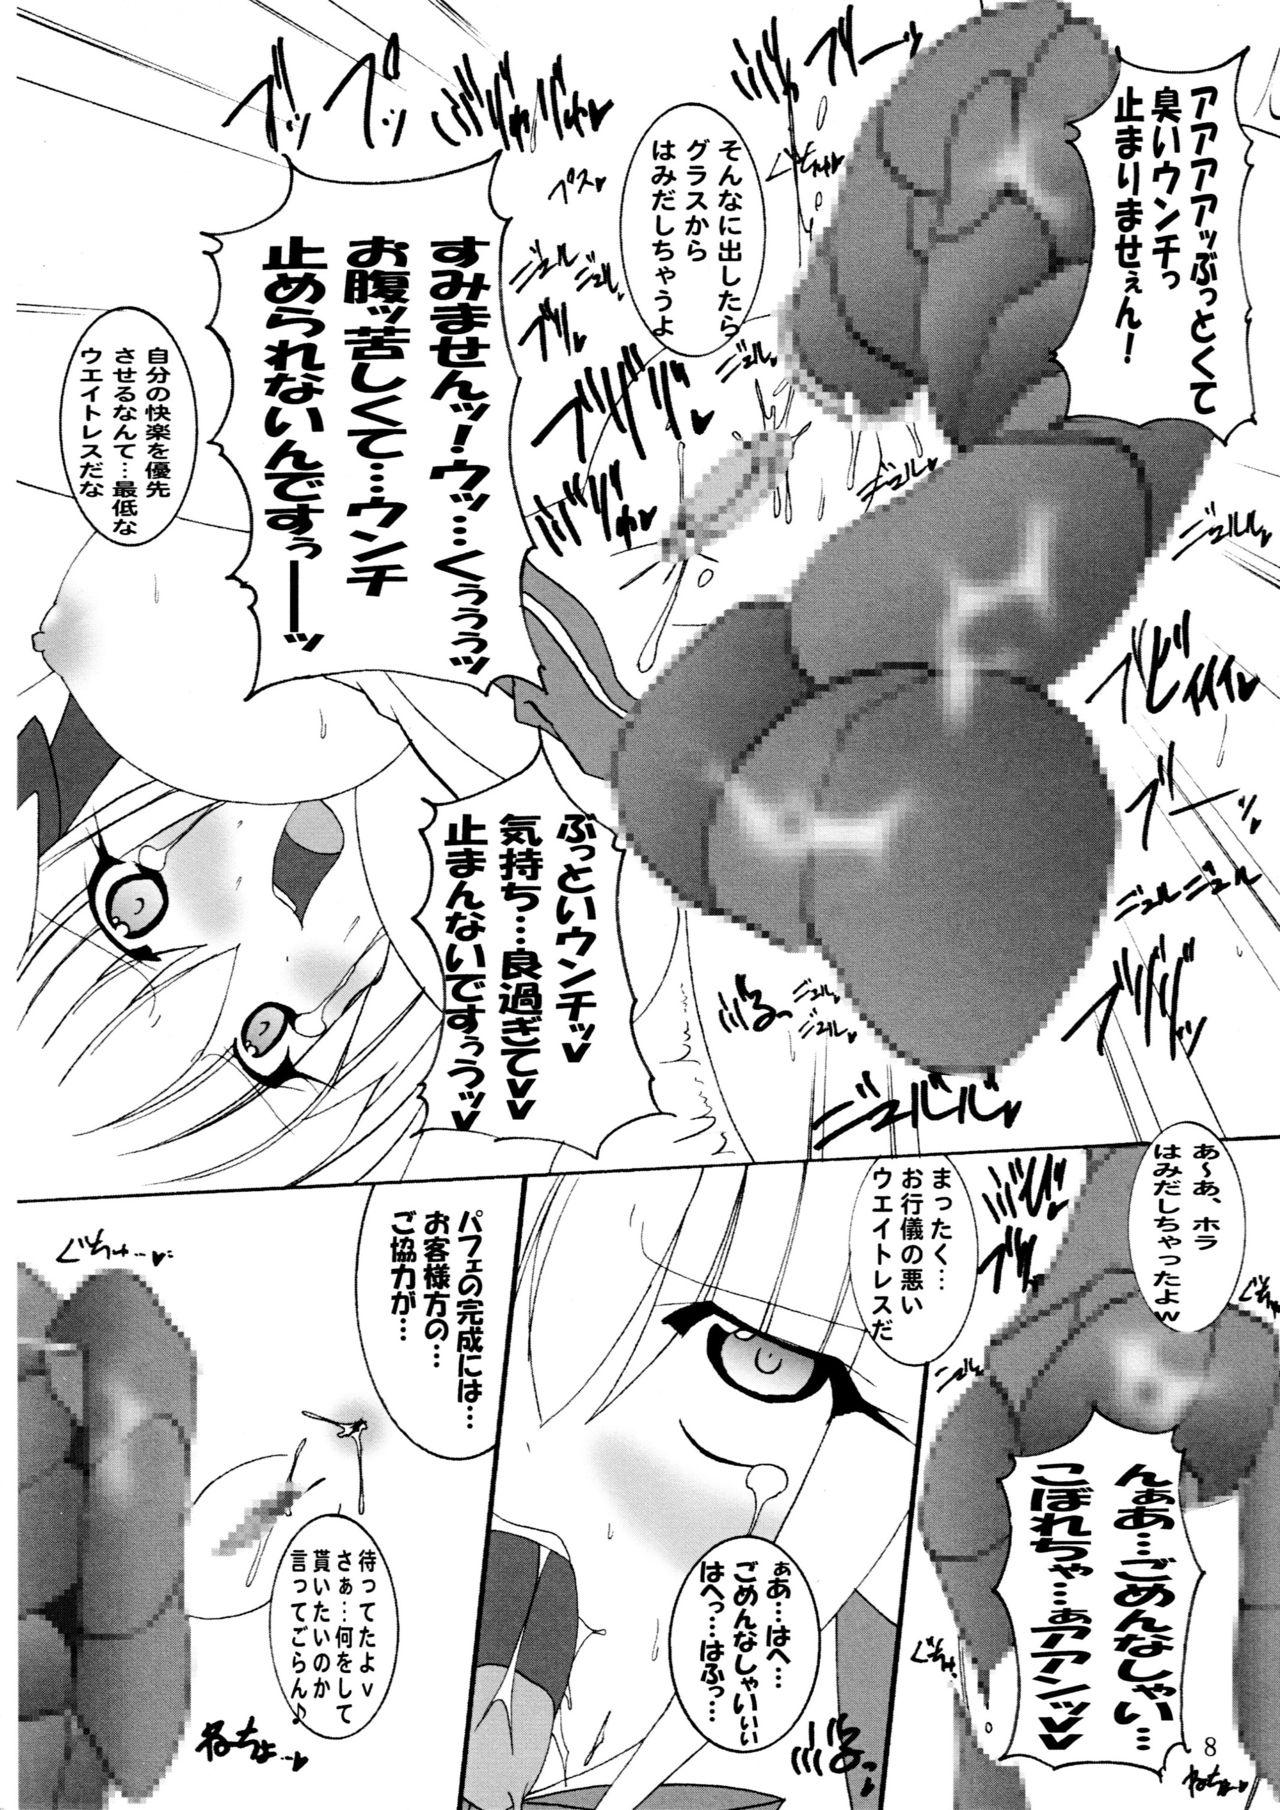 Anal Hitori Twintail & Abnormal Carnival - Di gi charat Hot Whores - Page 9